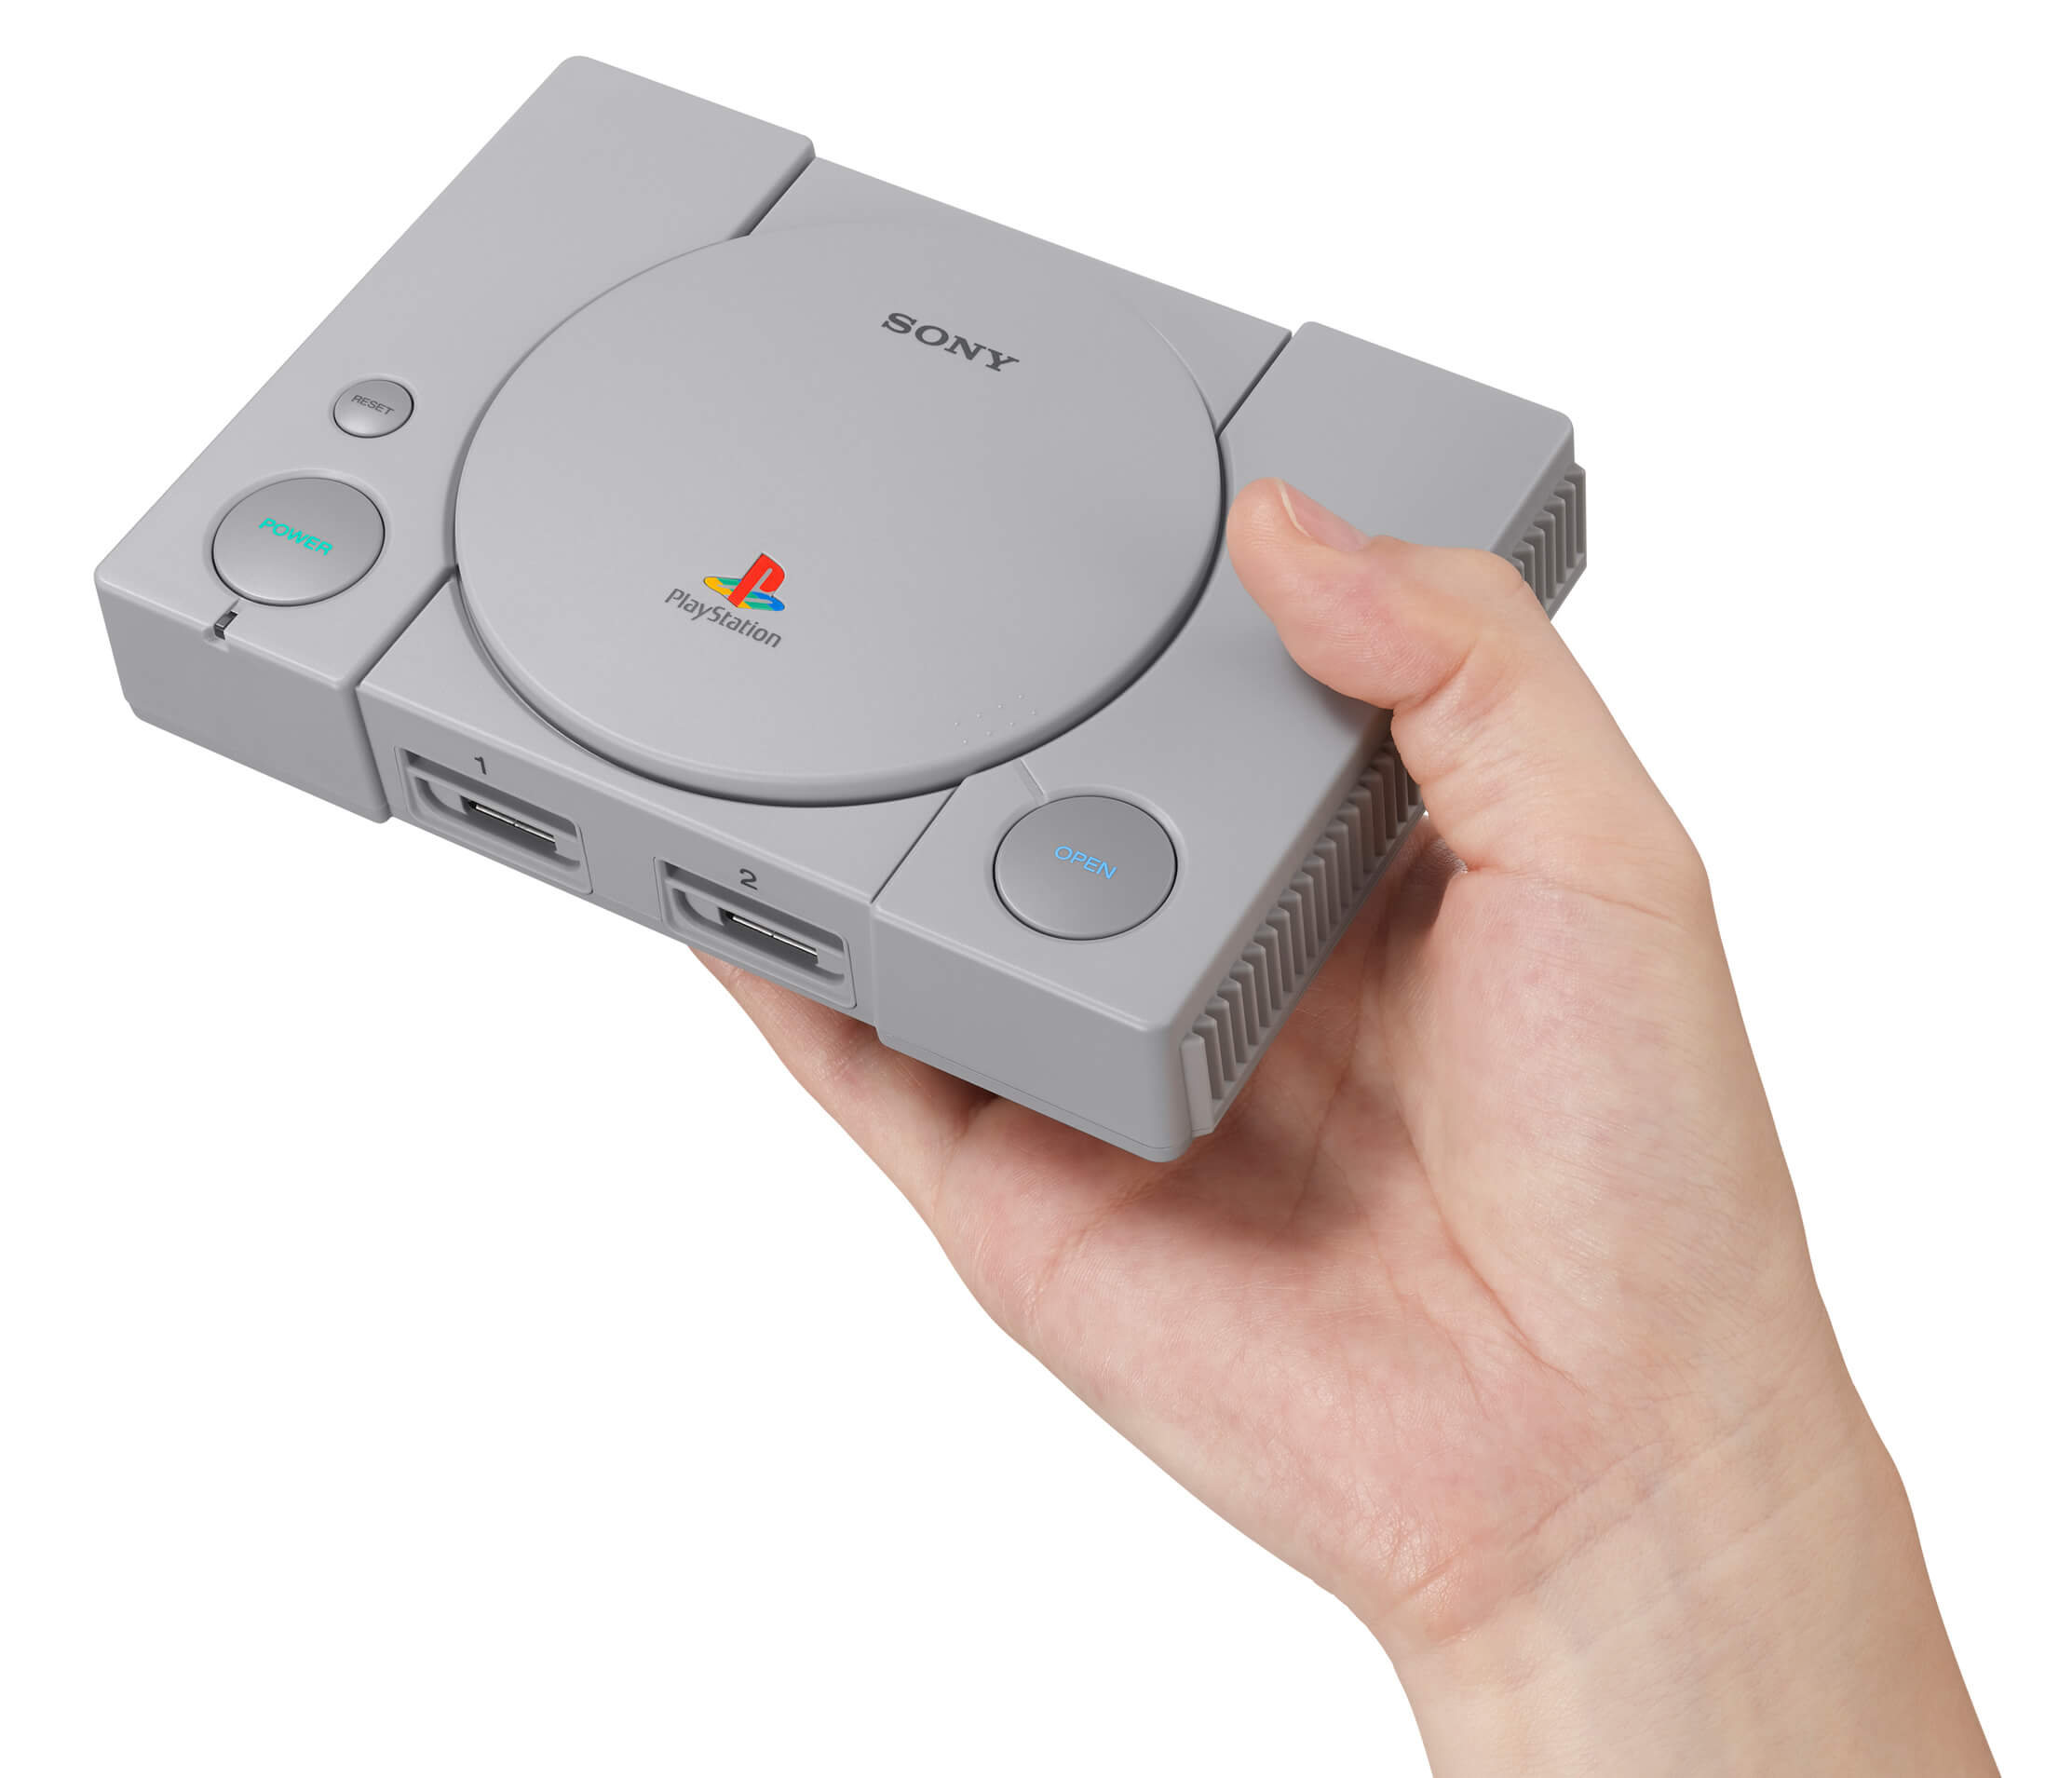 Sony's $100 PlayStation Classic will launch this December